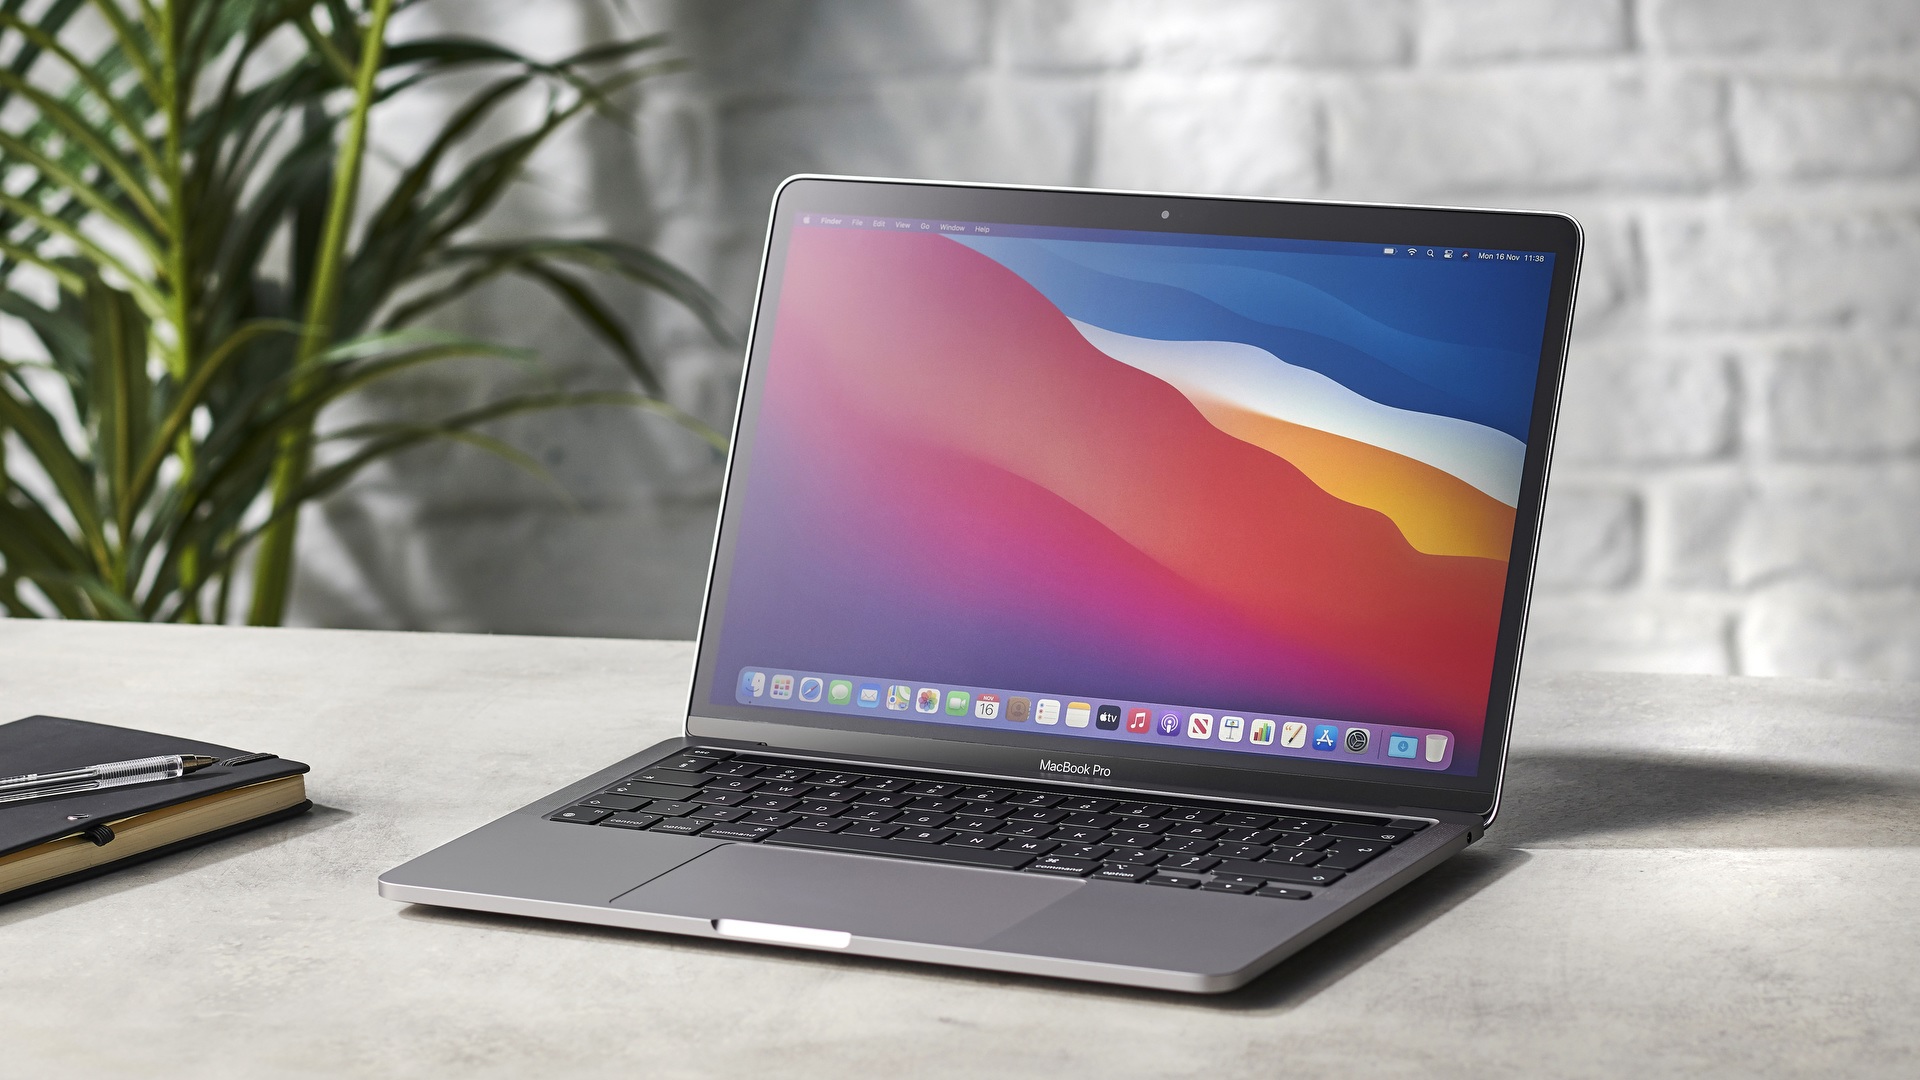 Apple MacBook Pro M1 13-inch review: Apple M1 silicon gives it wings